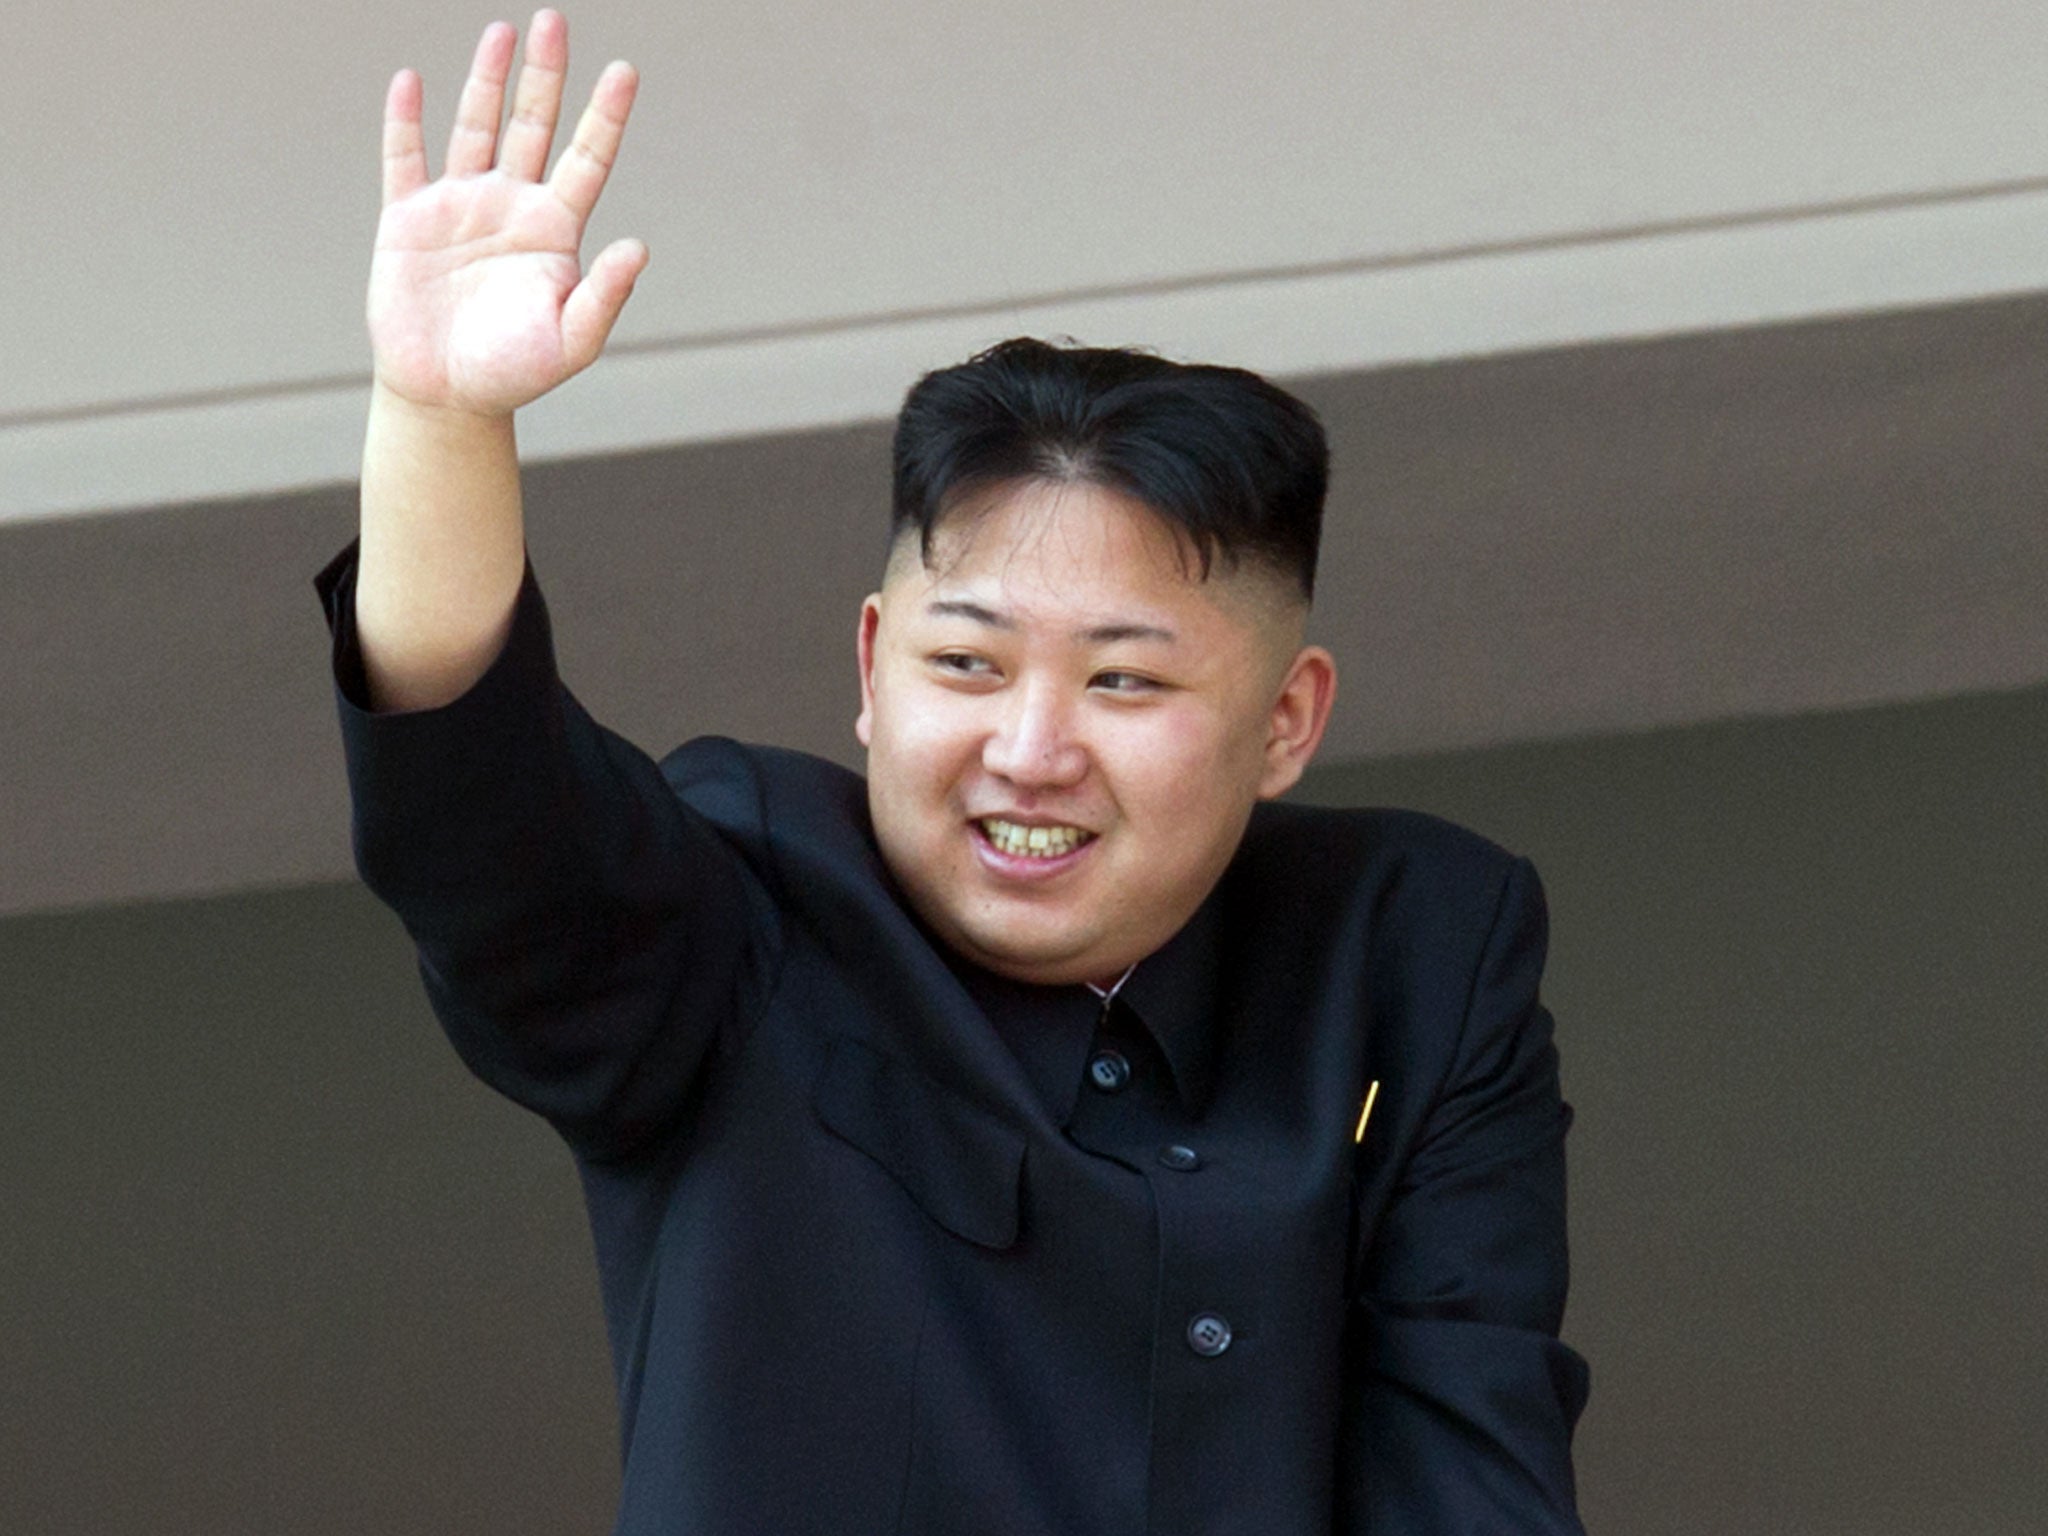 North Korean leader Kim Jong-Un waves after watching a military parade in honour of the 100th birthday of the late North Korean leader Kim Il-Sung in Pyongyang on April 15, 2012. North North Korean leader Kim Jong-Un delivered his first ever public speech